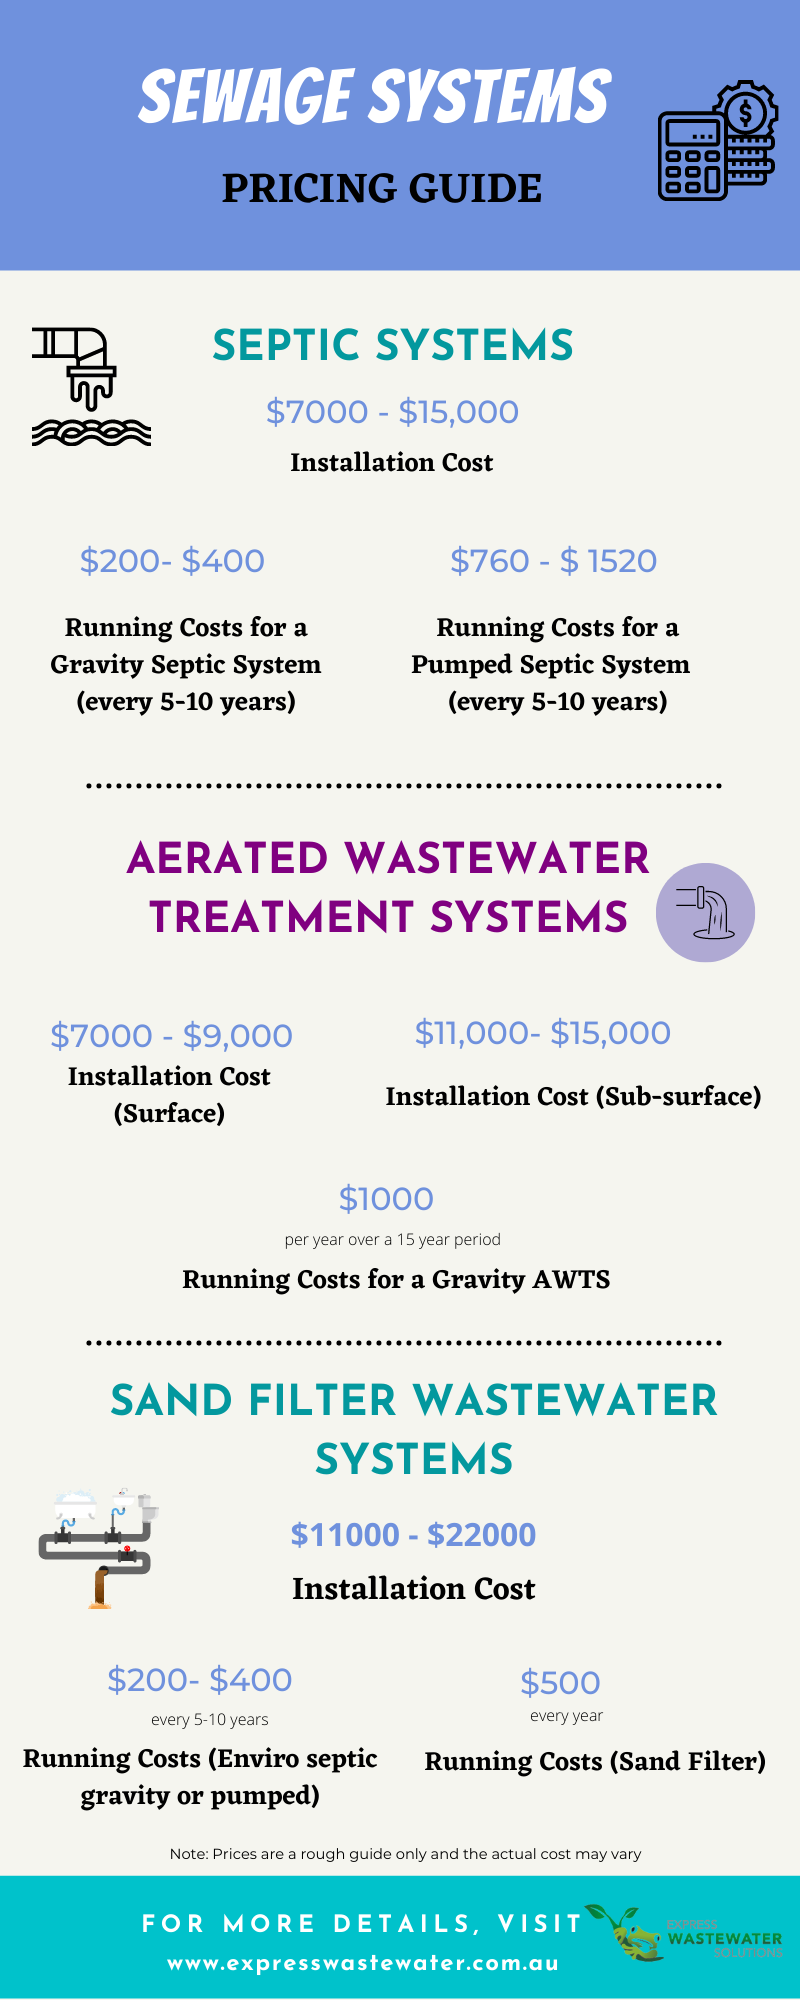 Sewage Systems & HSTP Price Guide infographic